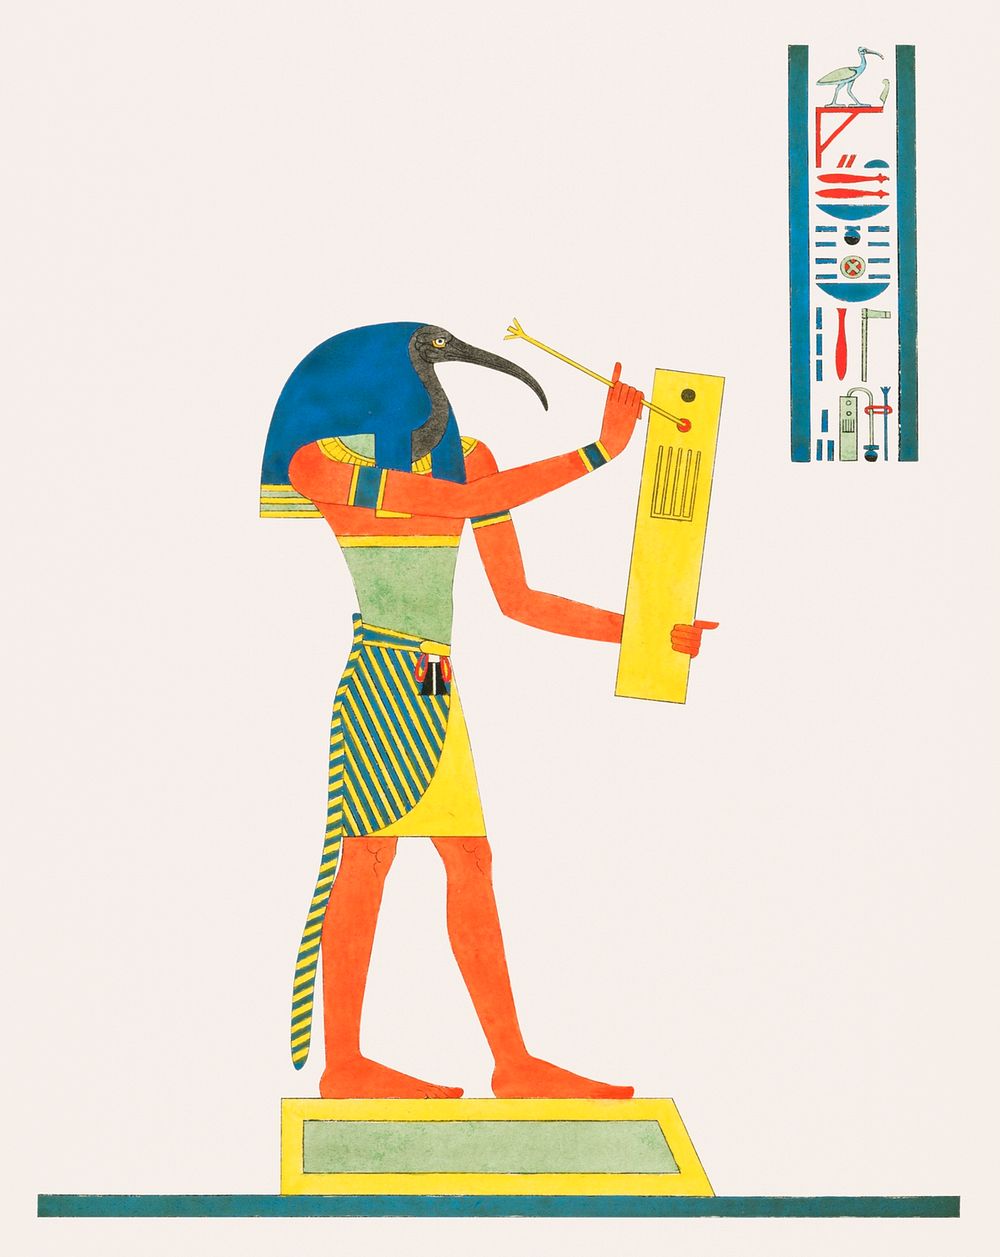 Thoth illustration from Pantheon Egyptien (1823-1825) by Leon Jean Joseph Dubois (1780-1846). Original from The New York…